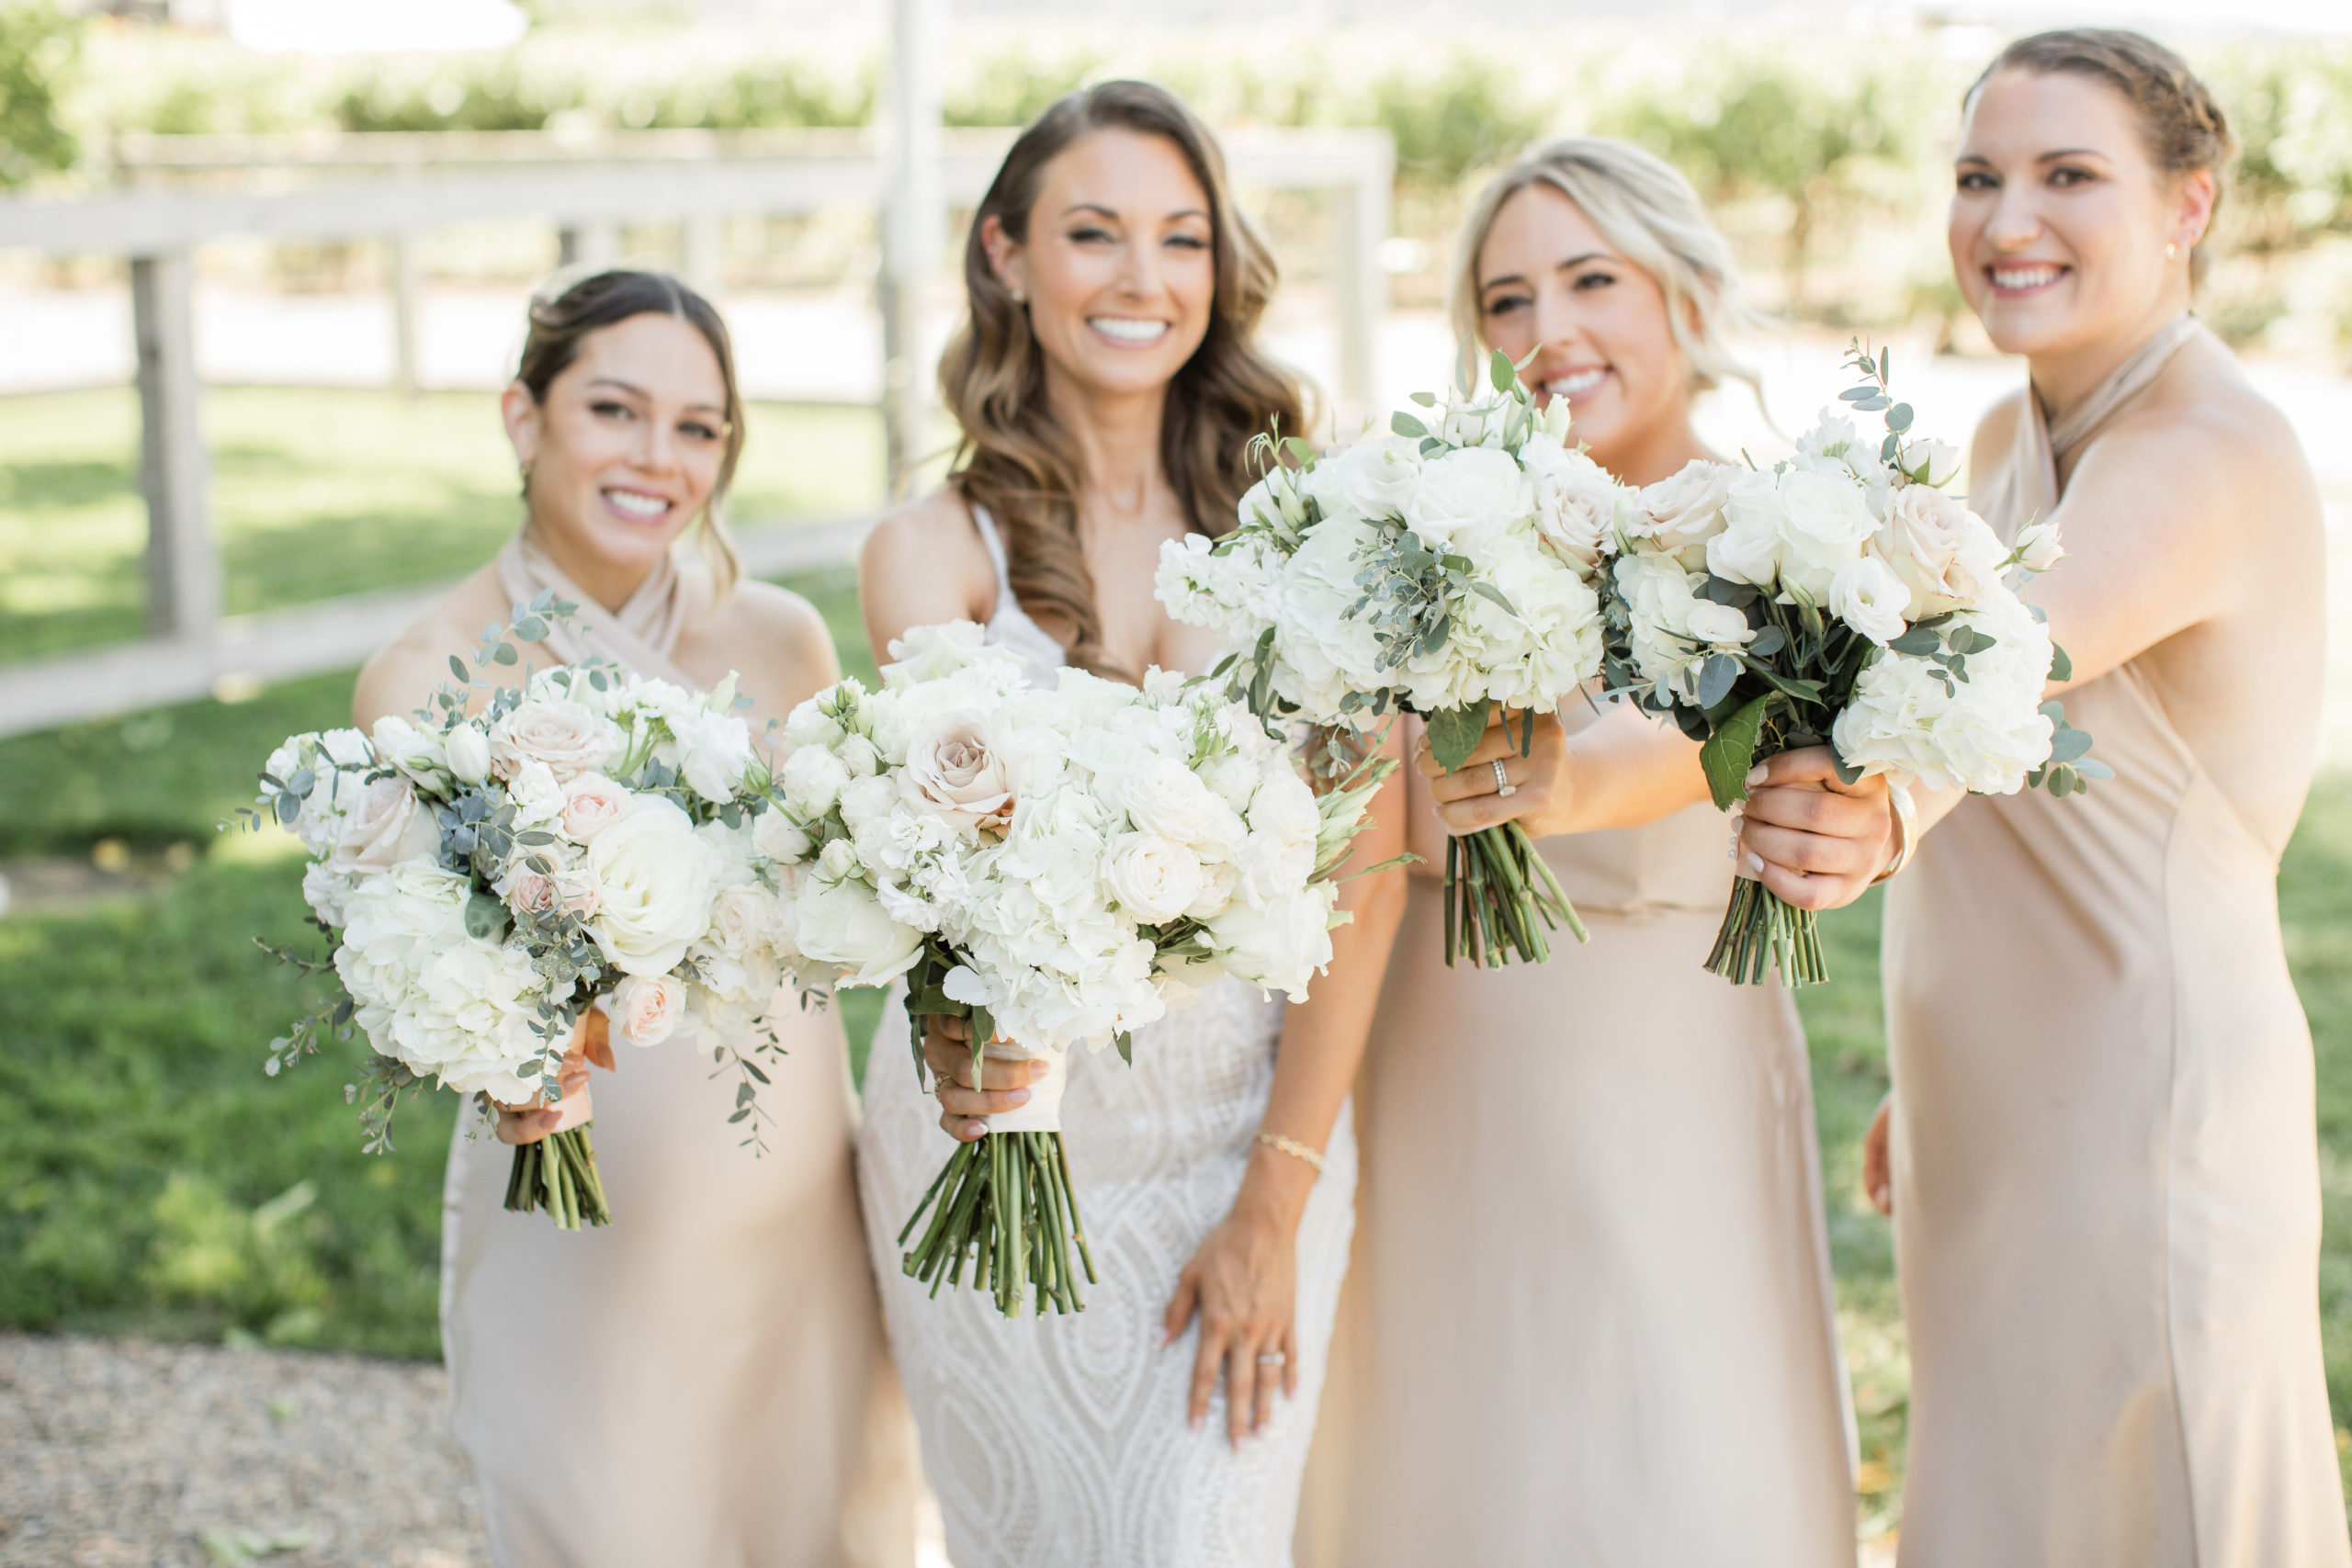 Tara and her bridesmaids in champagne dresses holding out their bouquets and smiling.